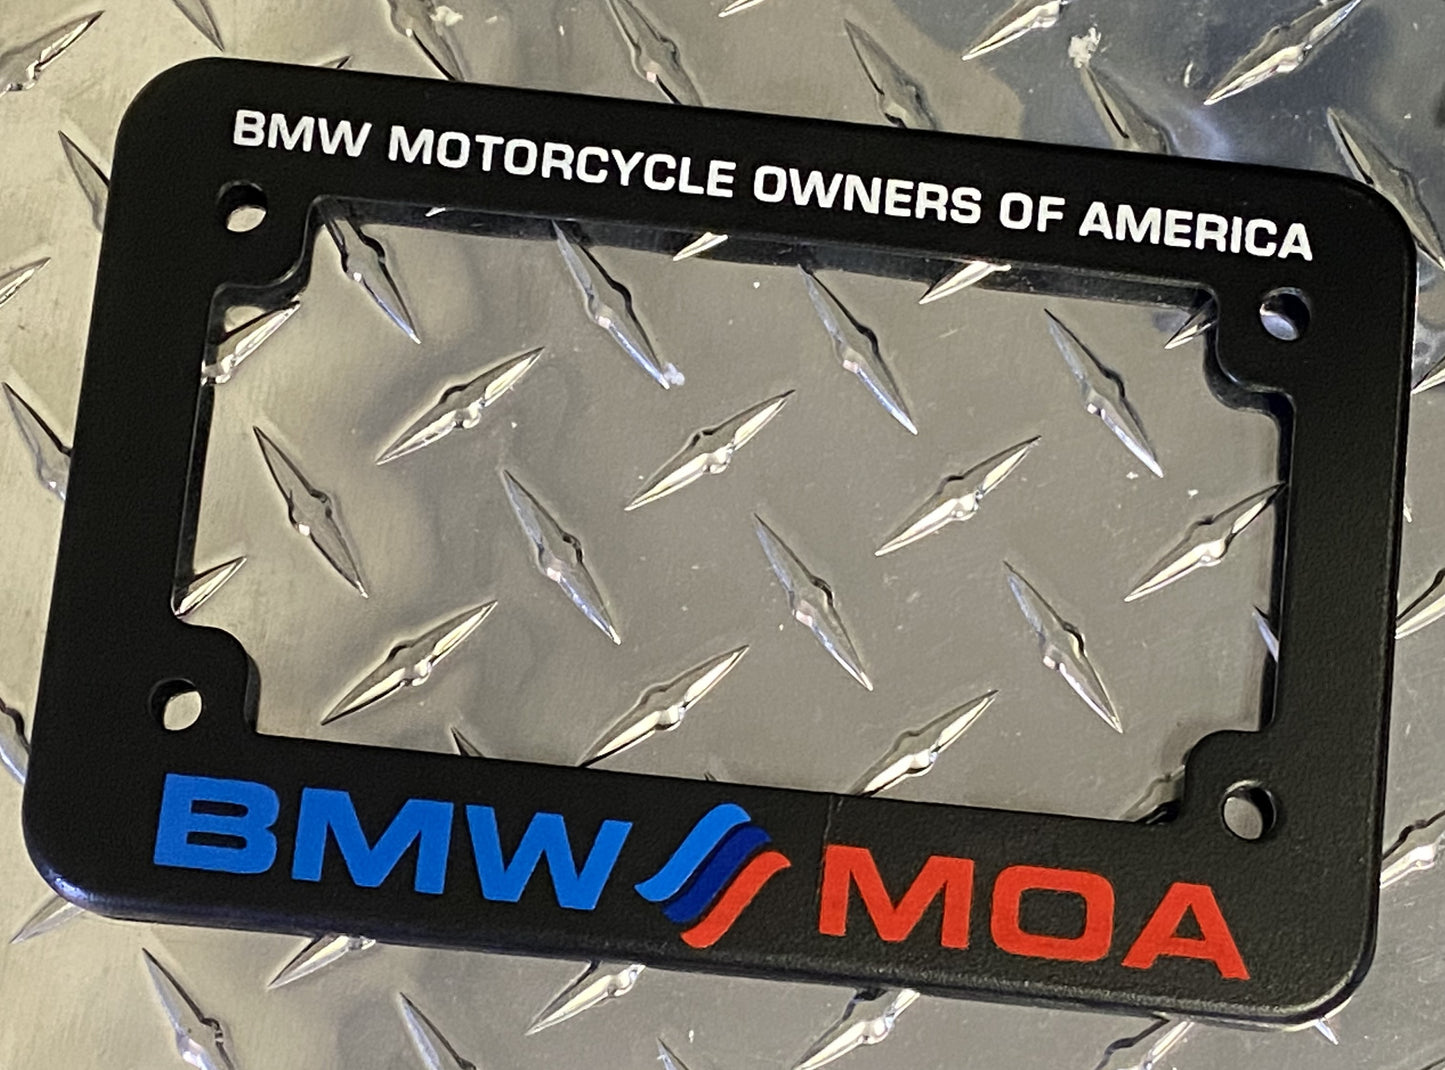 BMW MOA - Black - Motorcycle License Plate Frame